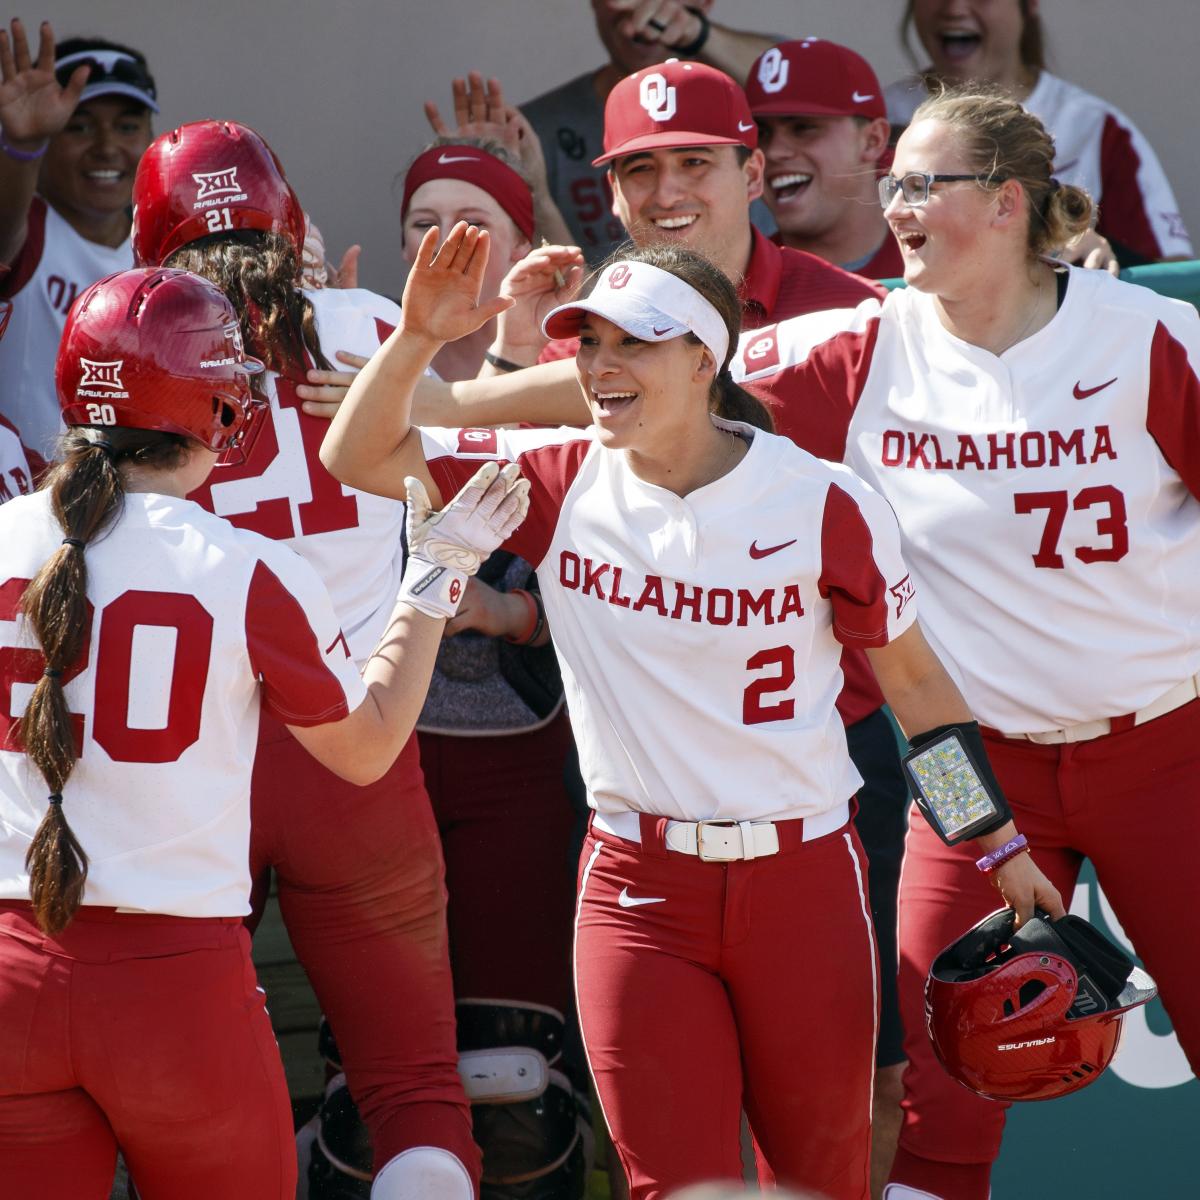 NCAA Softball Championships 2019 Bracket: Schedule, Matchups and More